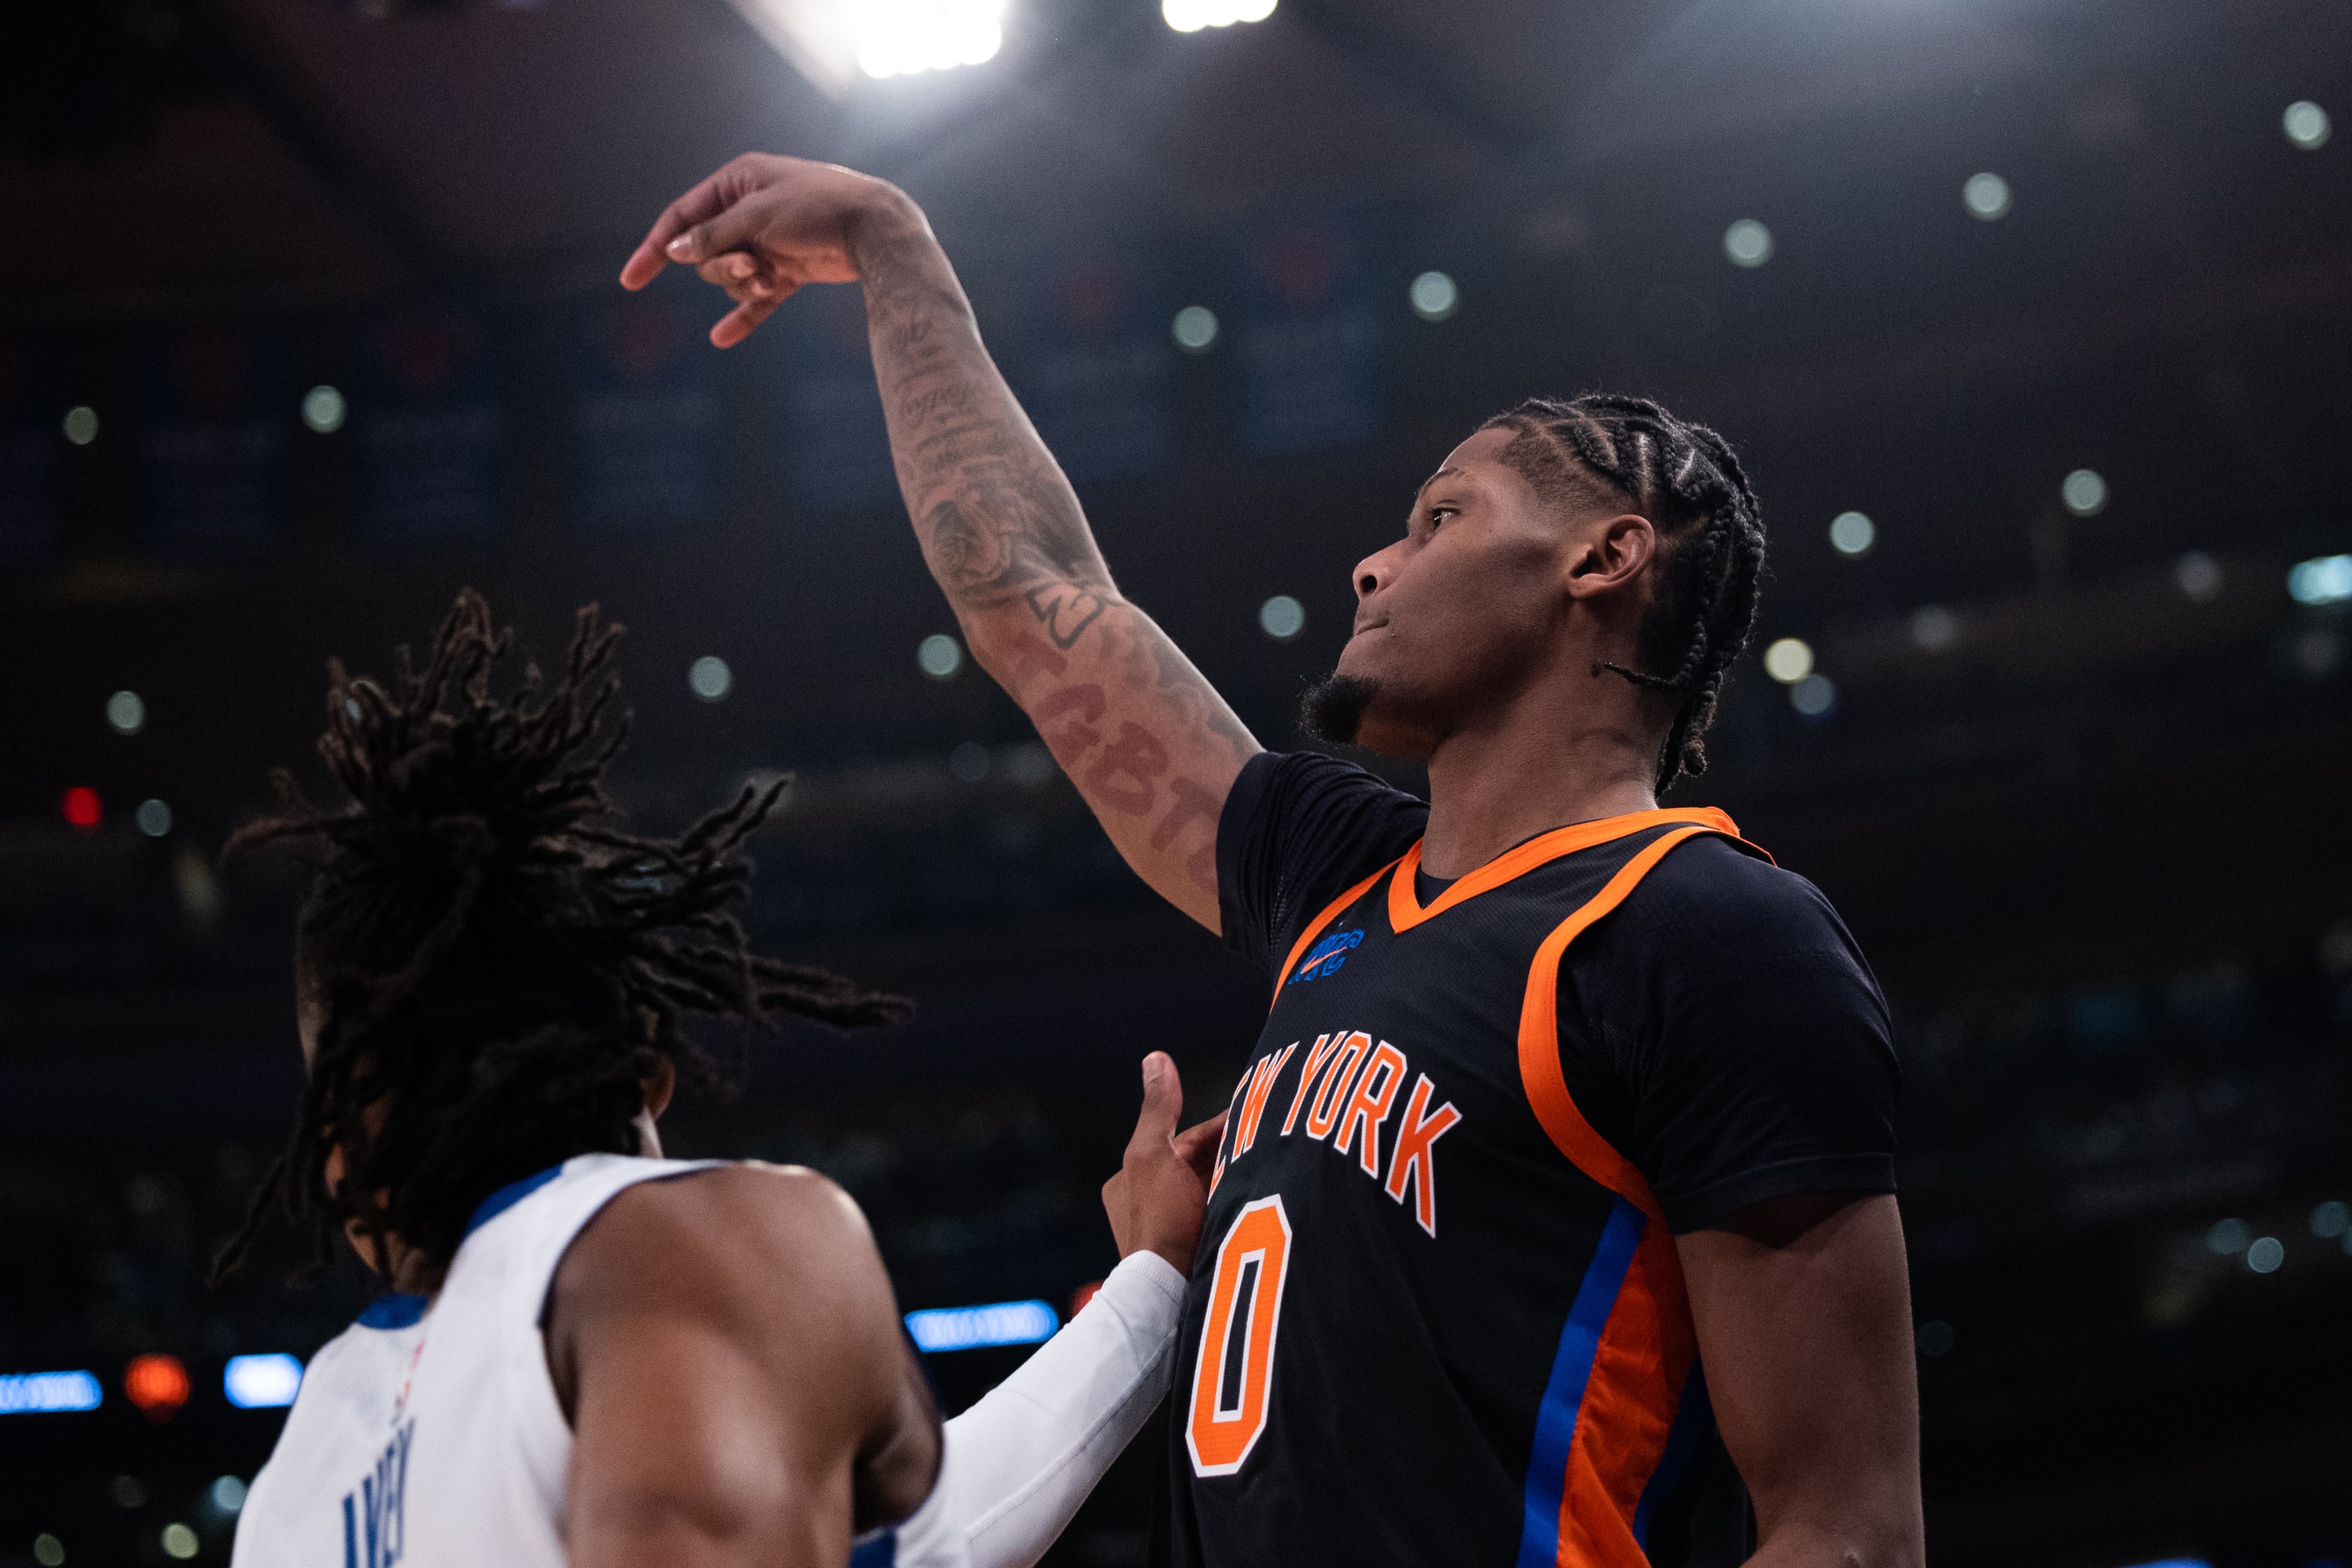 The Knicks trade Cam Reddish to the Indiana Pacers in this trade proposal